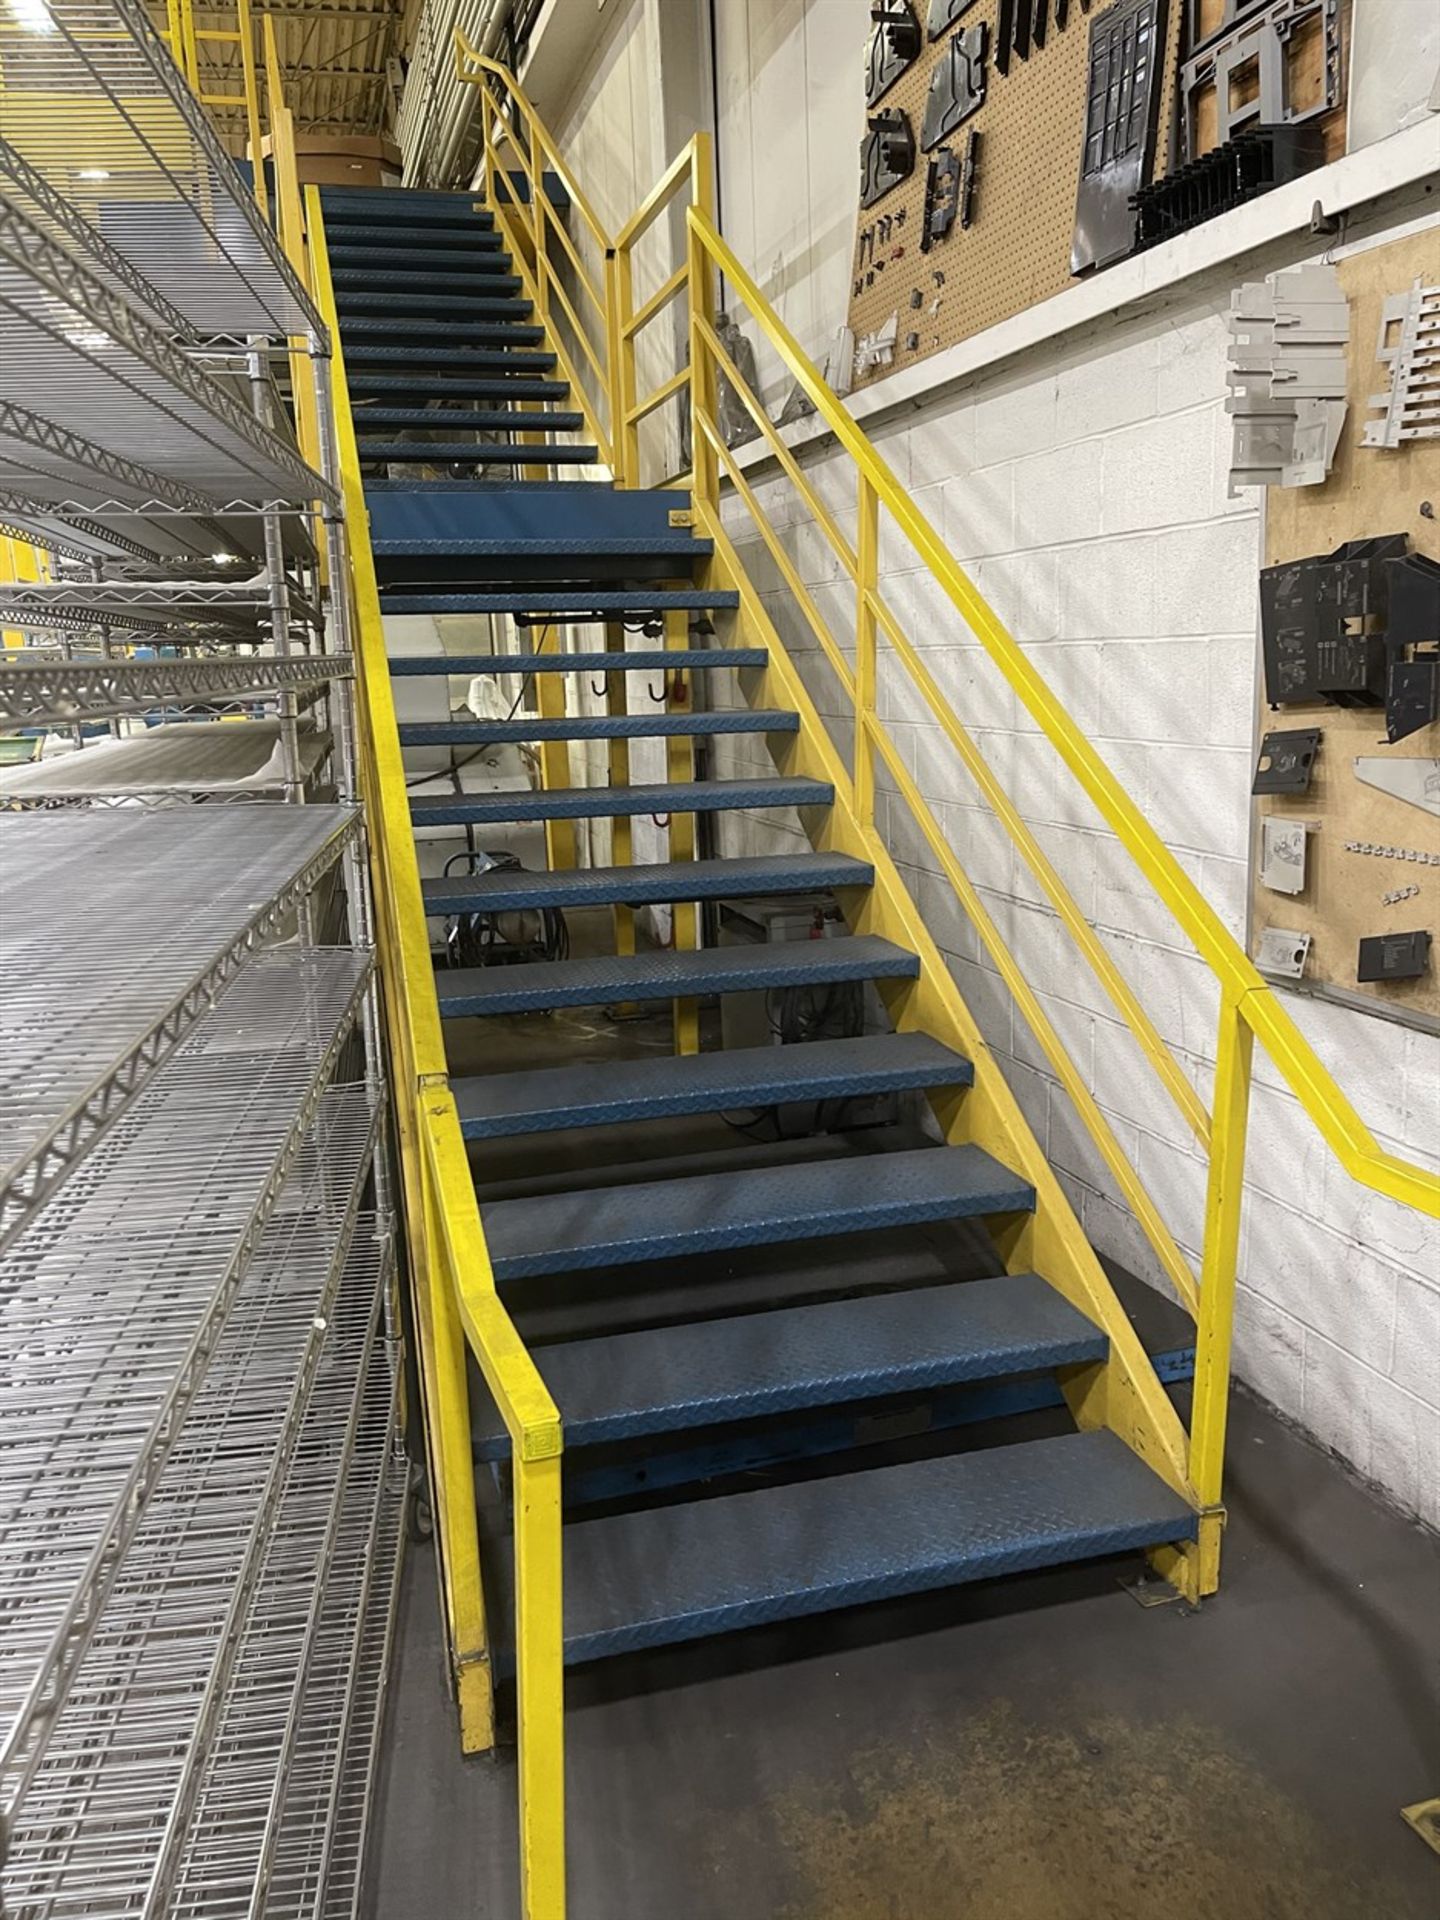 Mezzanine, 14'4"W x 120'L x 12' Under Deck, w/ (2) Staircases and (2) Loadout Gates - Image 10 of 13